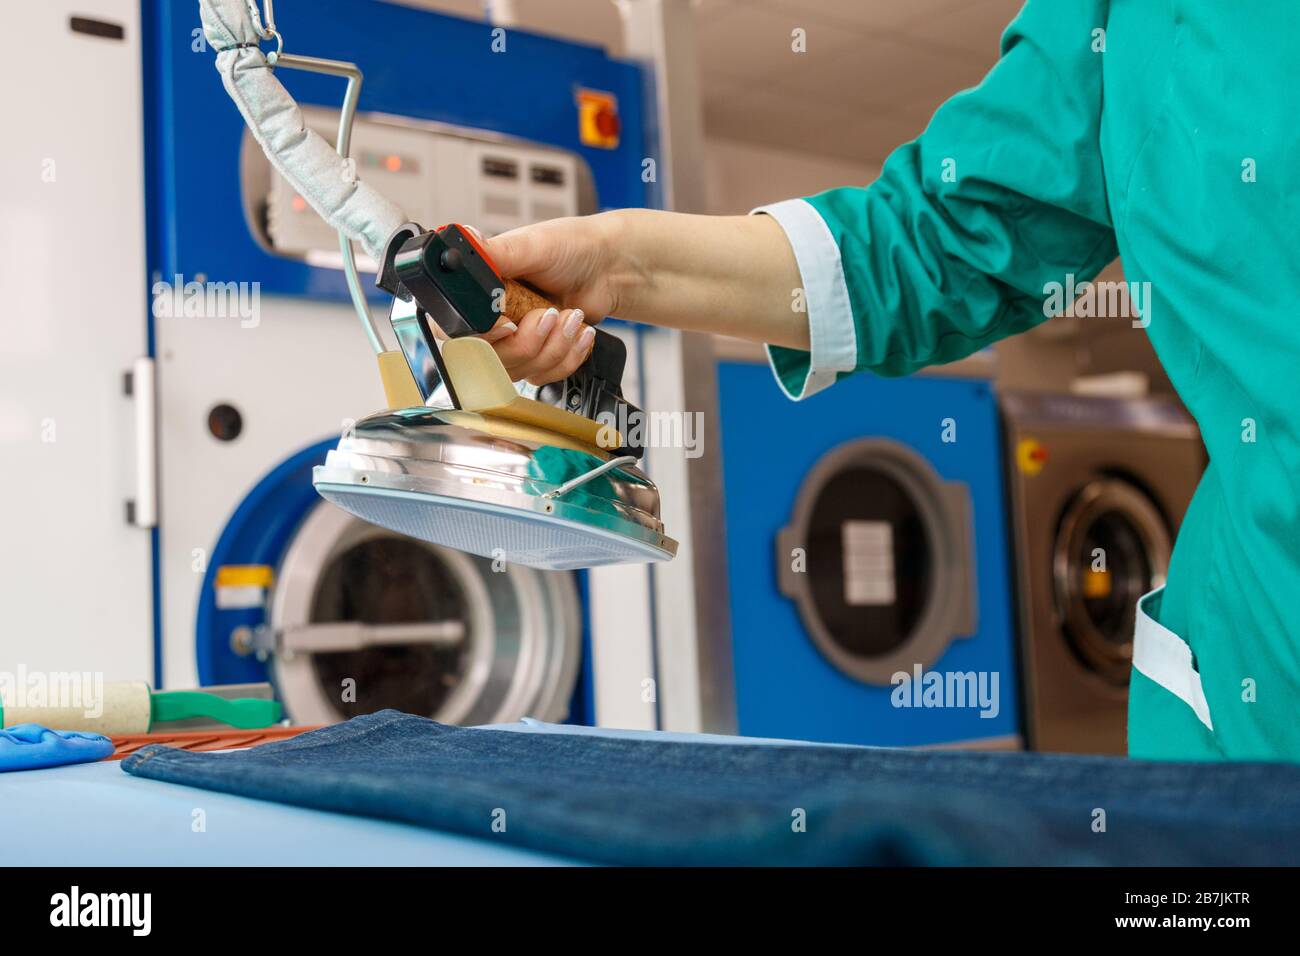 Female hand ironing blue jeans in a dry cleaning laundry service Stock Photo